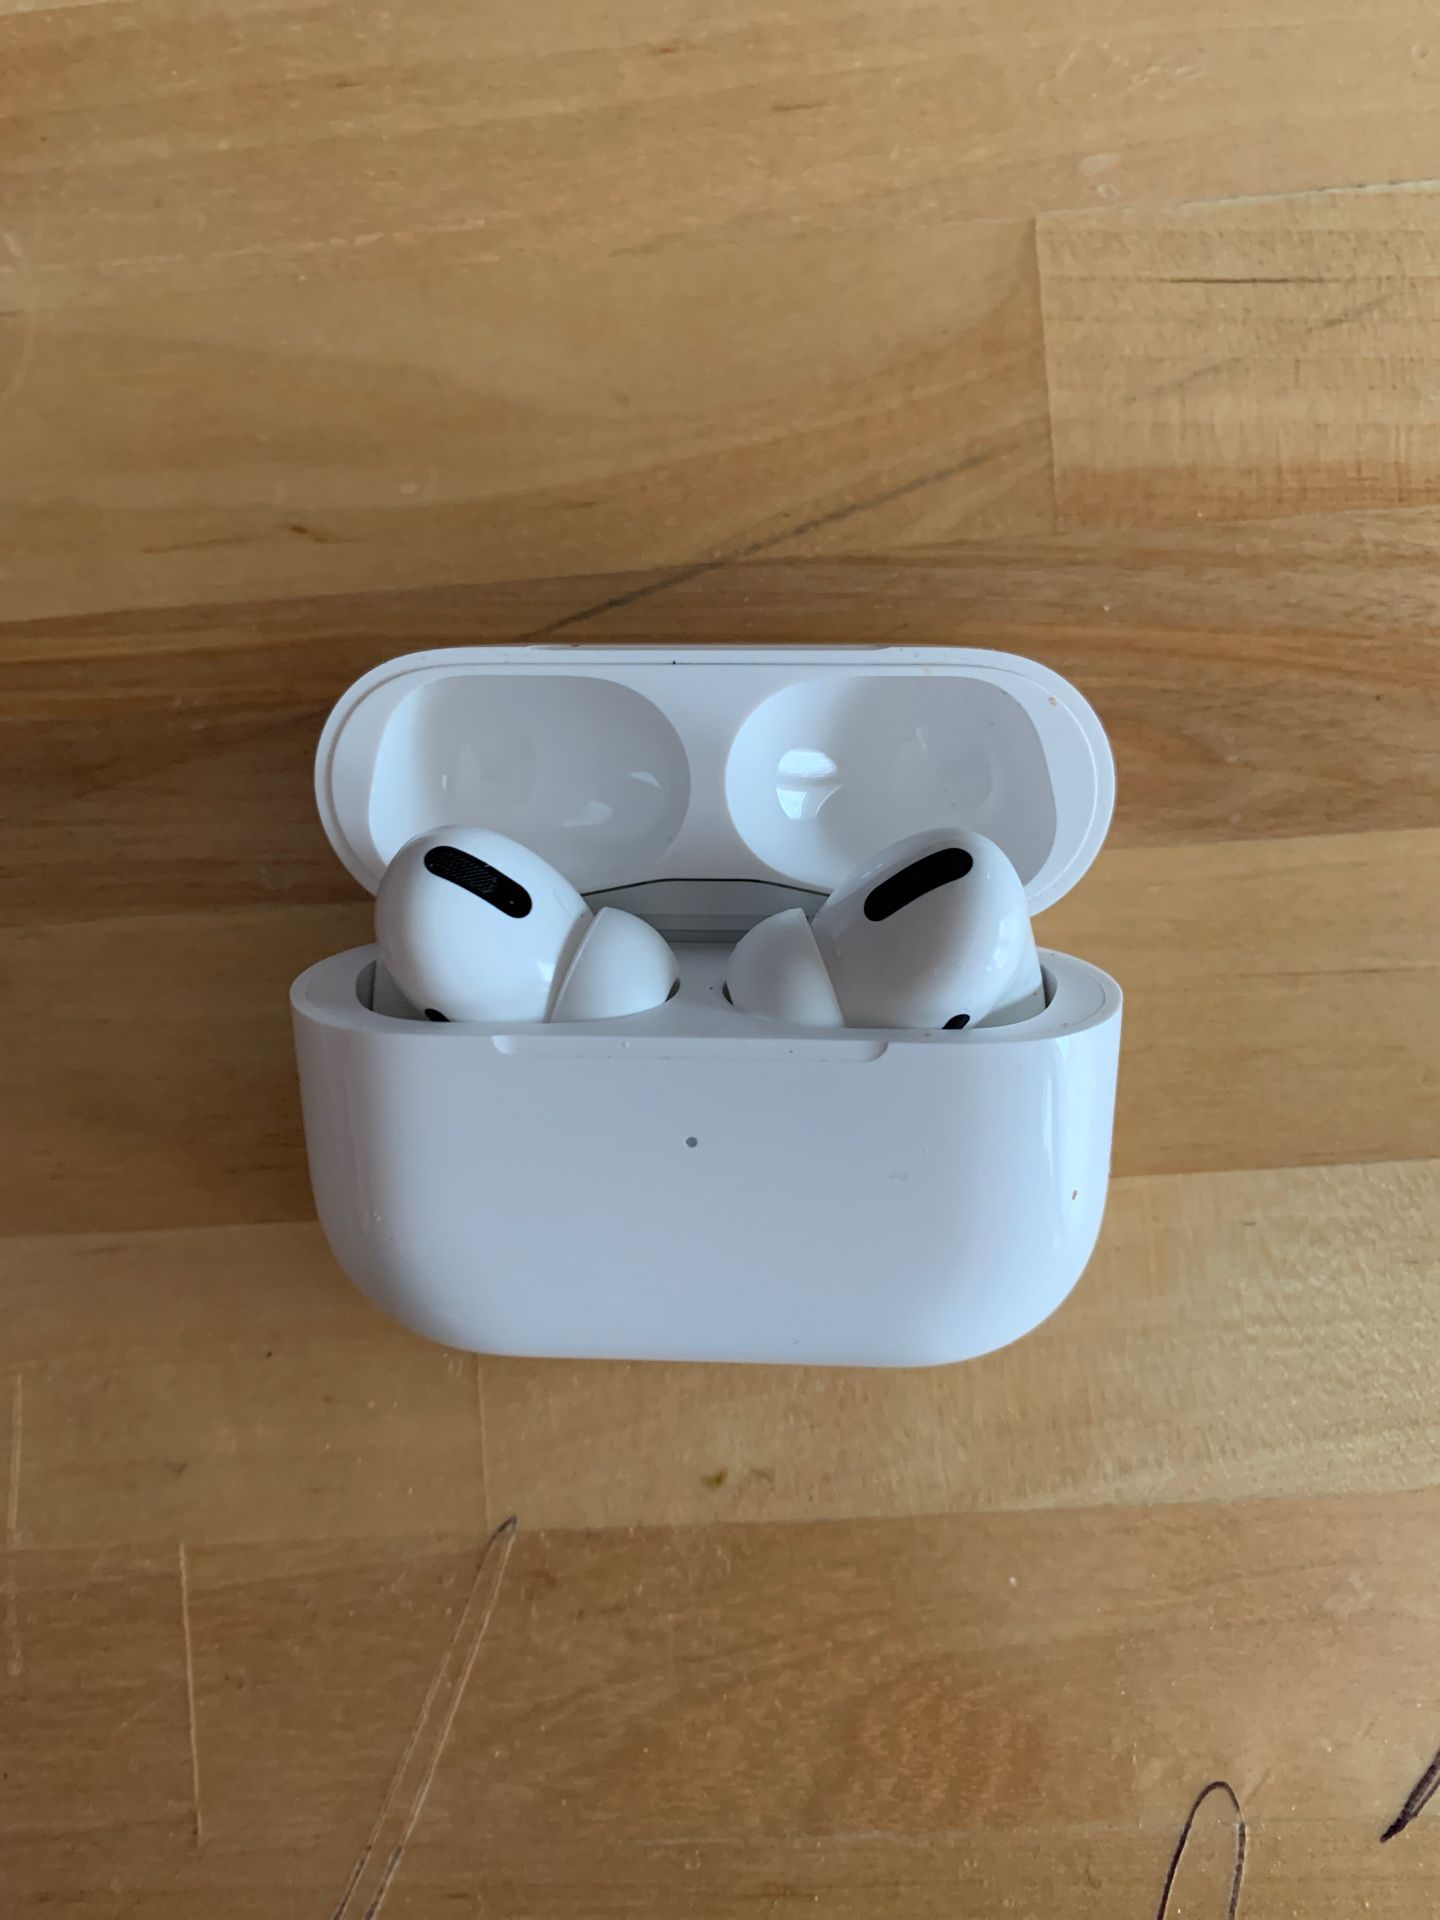 Airpods Pro (Apple)